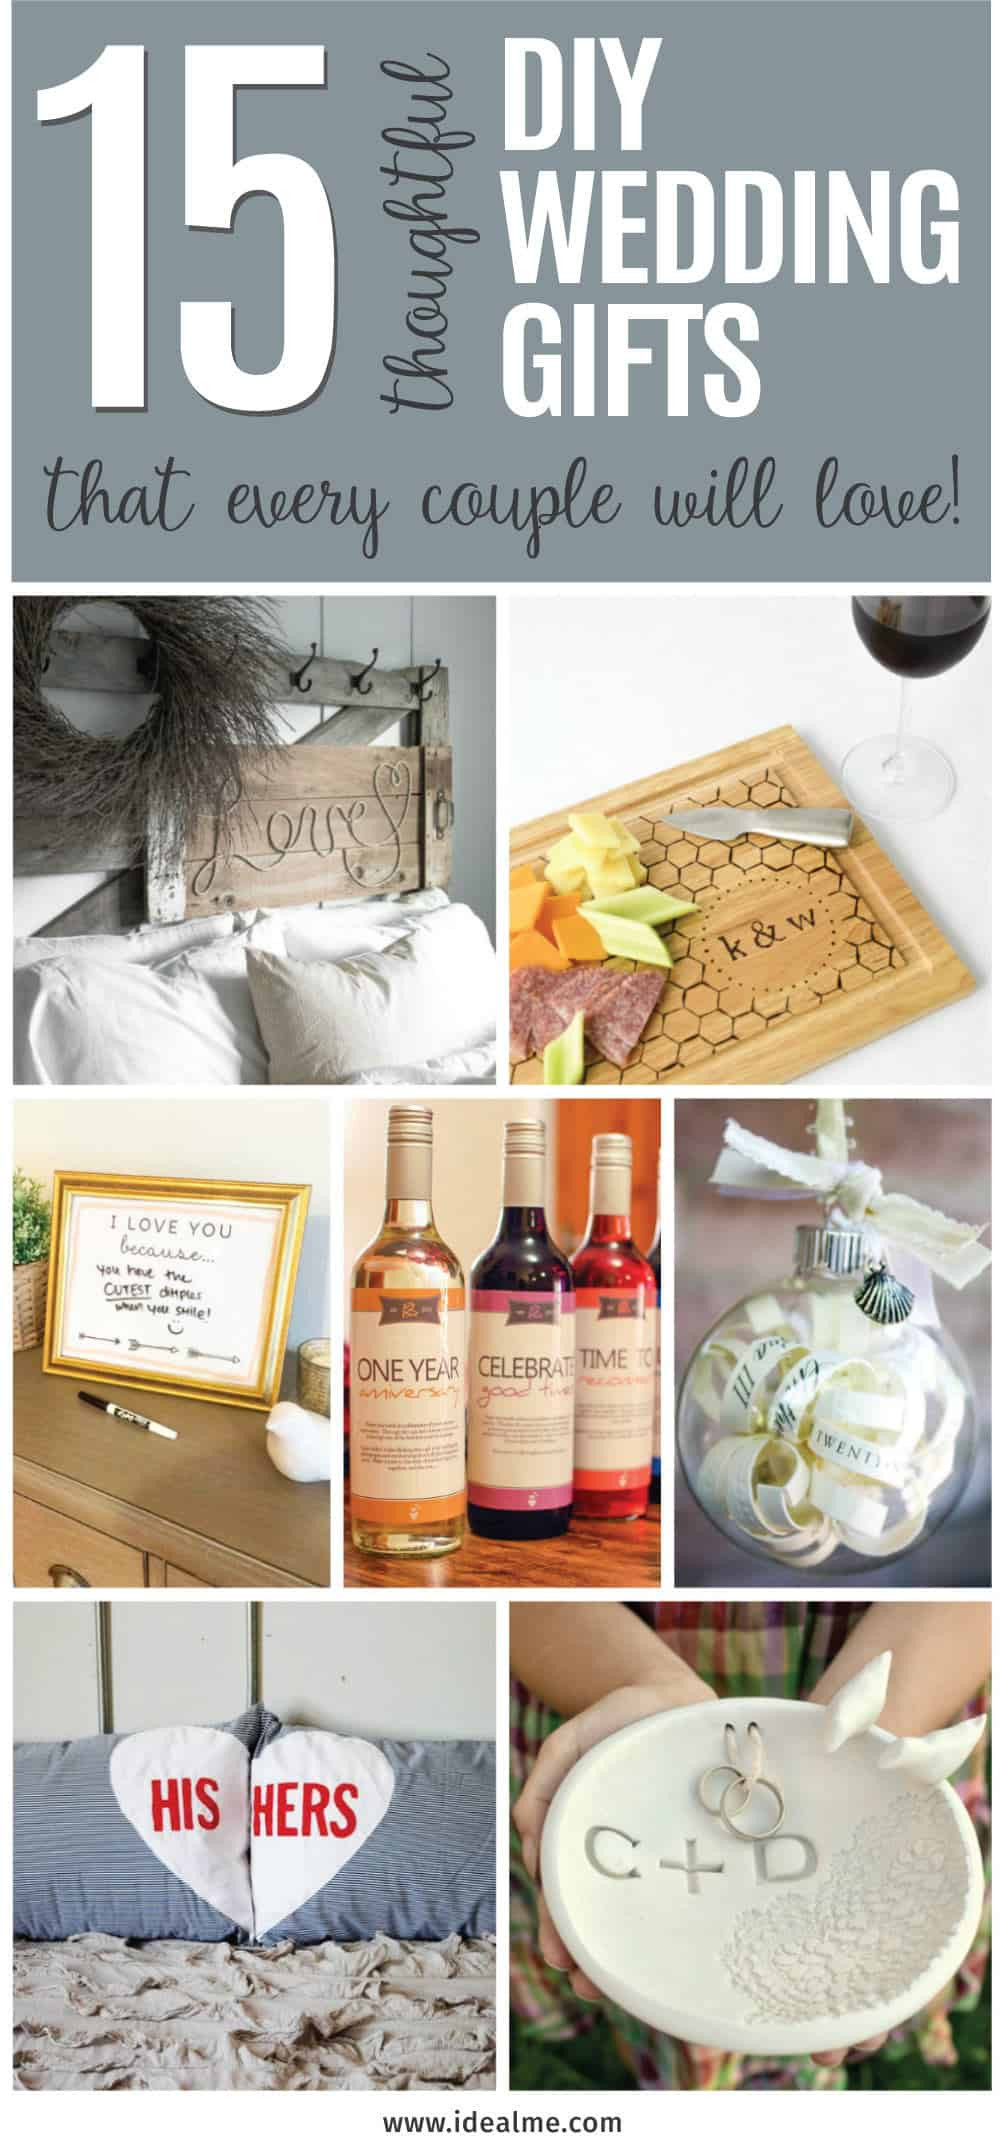 DIY Wedding Gift
 15 Thoughtful DIY Wedding Gifts that Every Couple Will